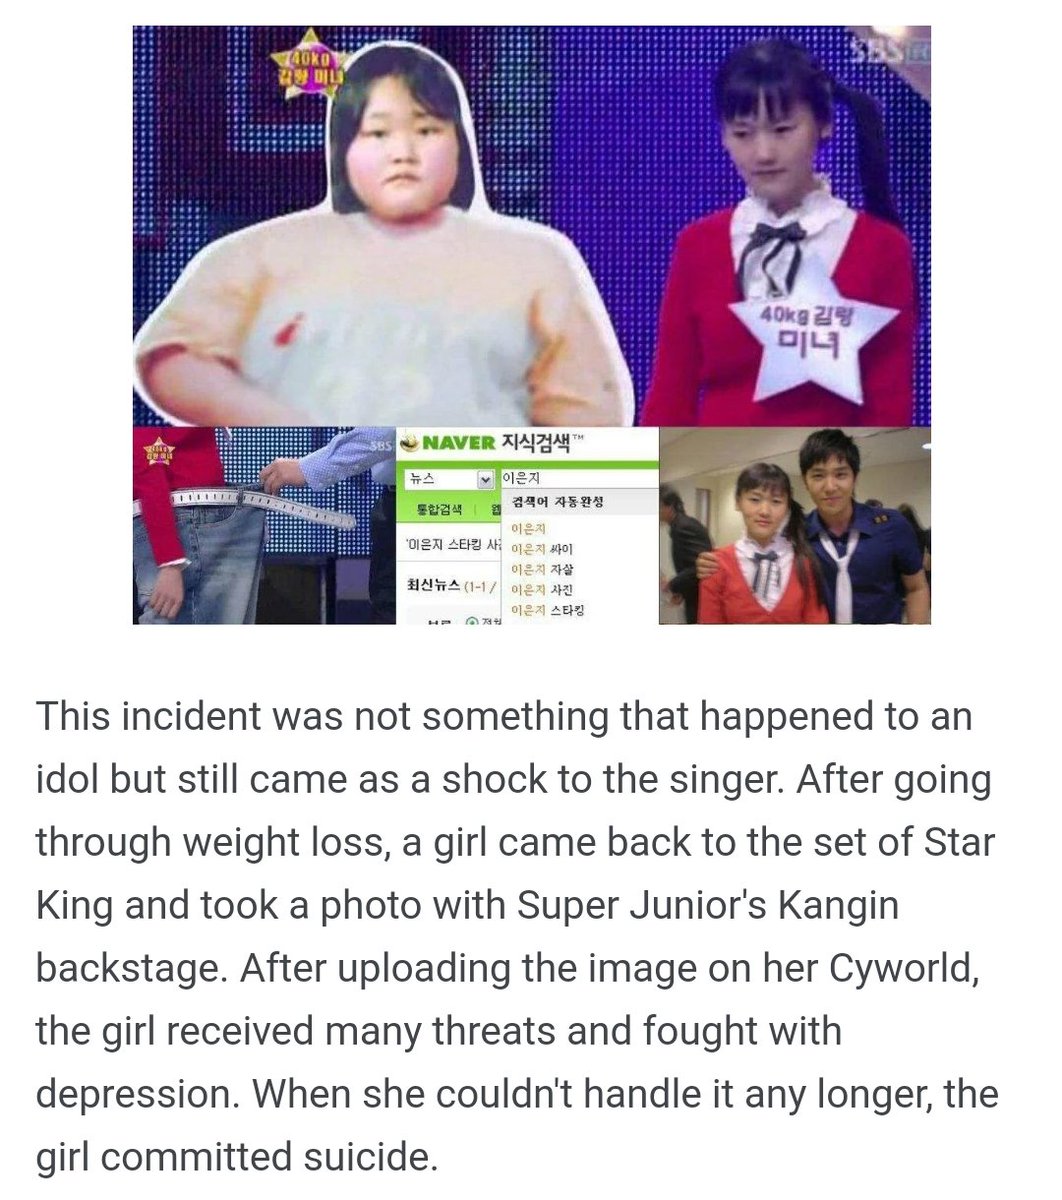 I can't seem to stop shaking as I try to type this so here's a screenshot of what happened to that girl on Star King.